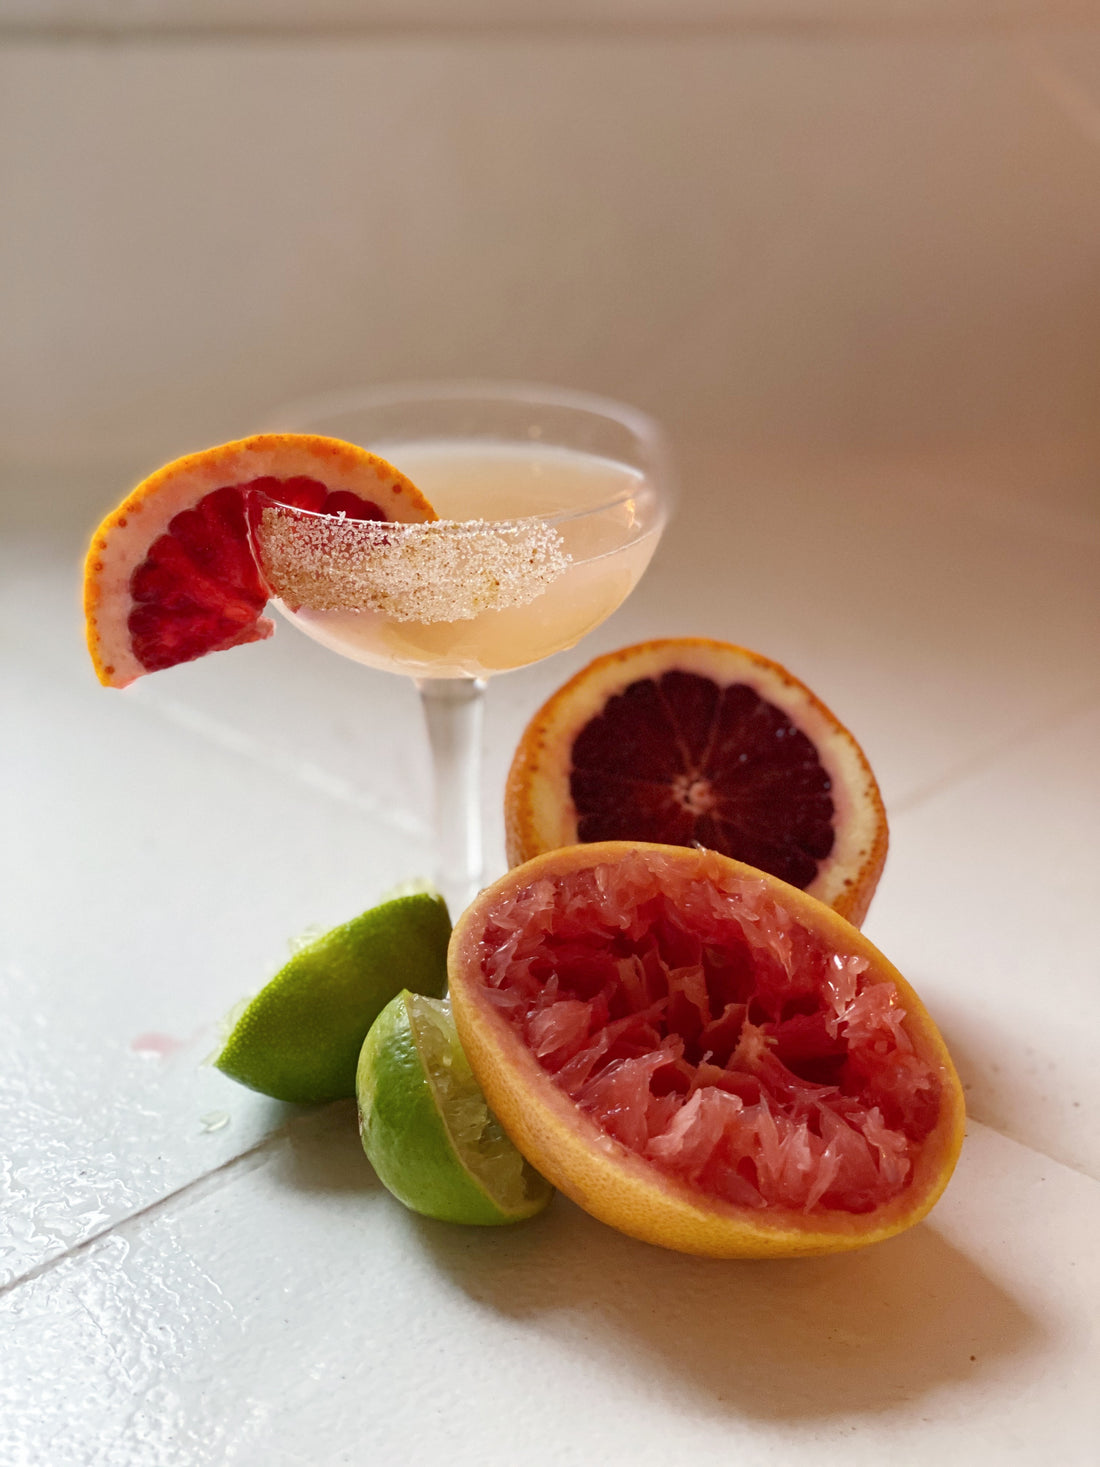 a coup cocktail glass is filled with a peachy liquid and a sugar rim. There is a sliced grapefruit as garnish on the glass and at the base of the glass is 2 squeezed limes, a squeezed grapefruit and half of a blood orange